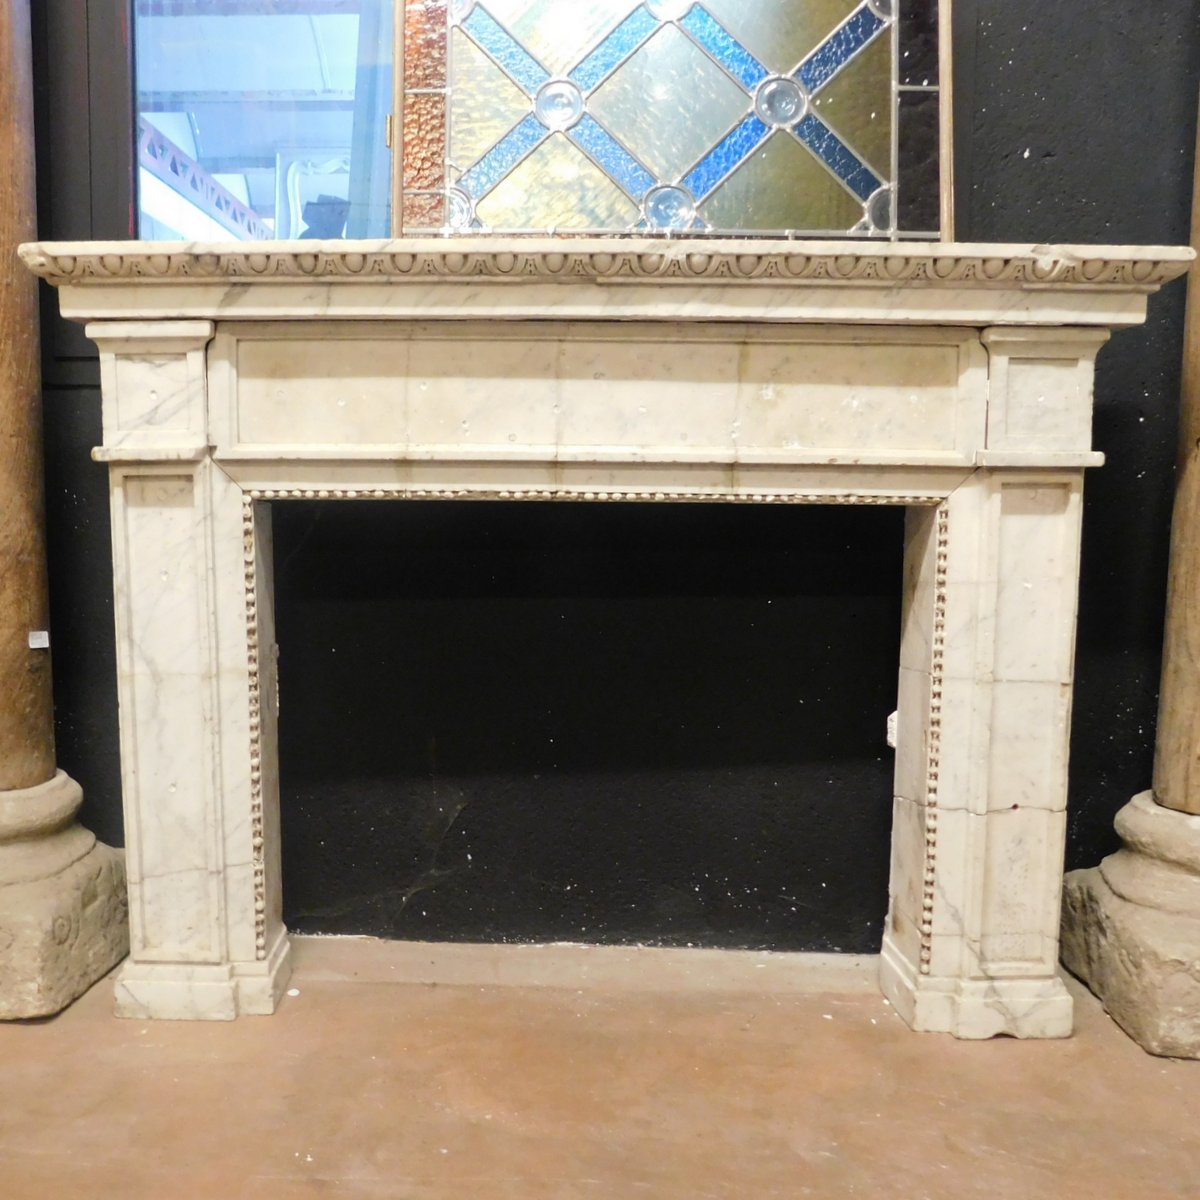 chm655 - fireplace in white Carrara marble, 19th century, size cm 136 x h 98